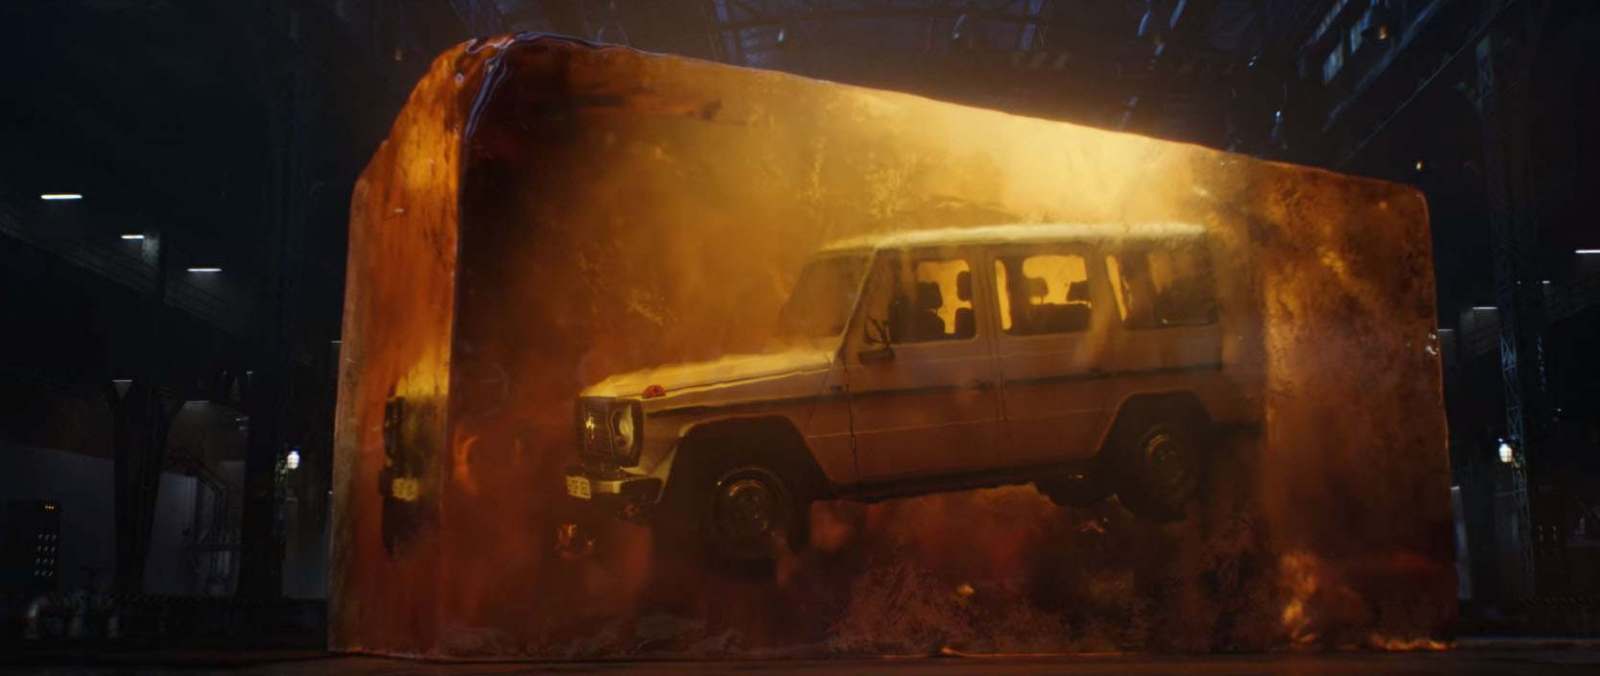 mercedes-benz-teases-january-15-g-class-launch-with-jurassic-park-reference-122598_1.jpg